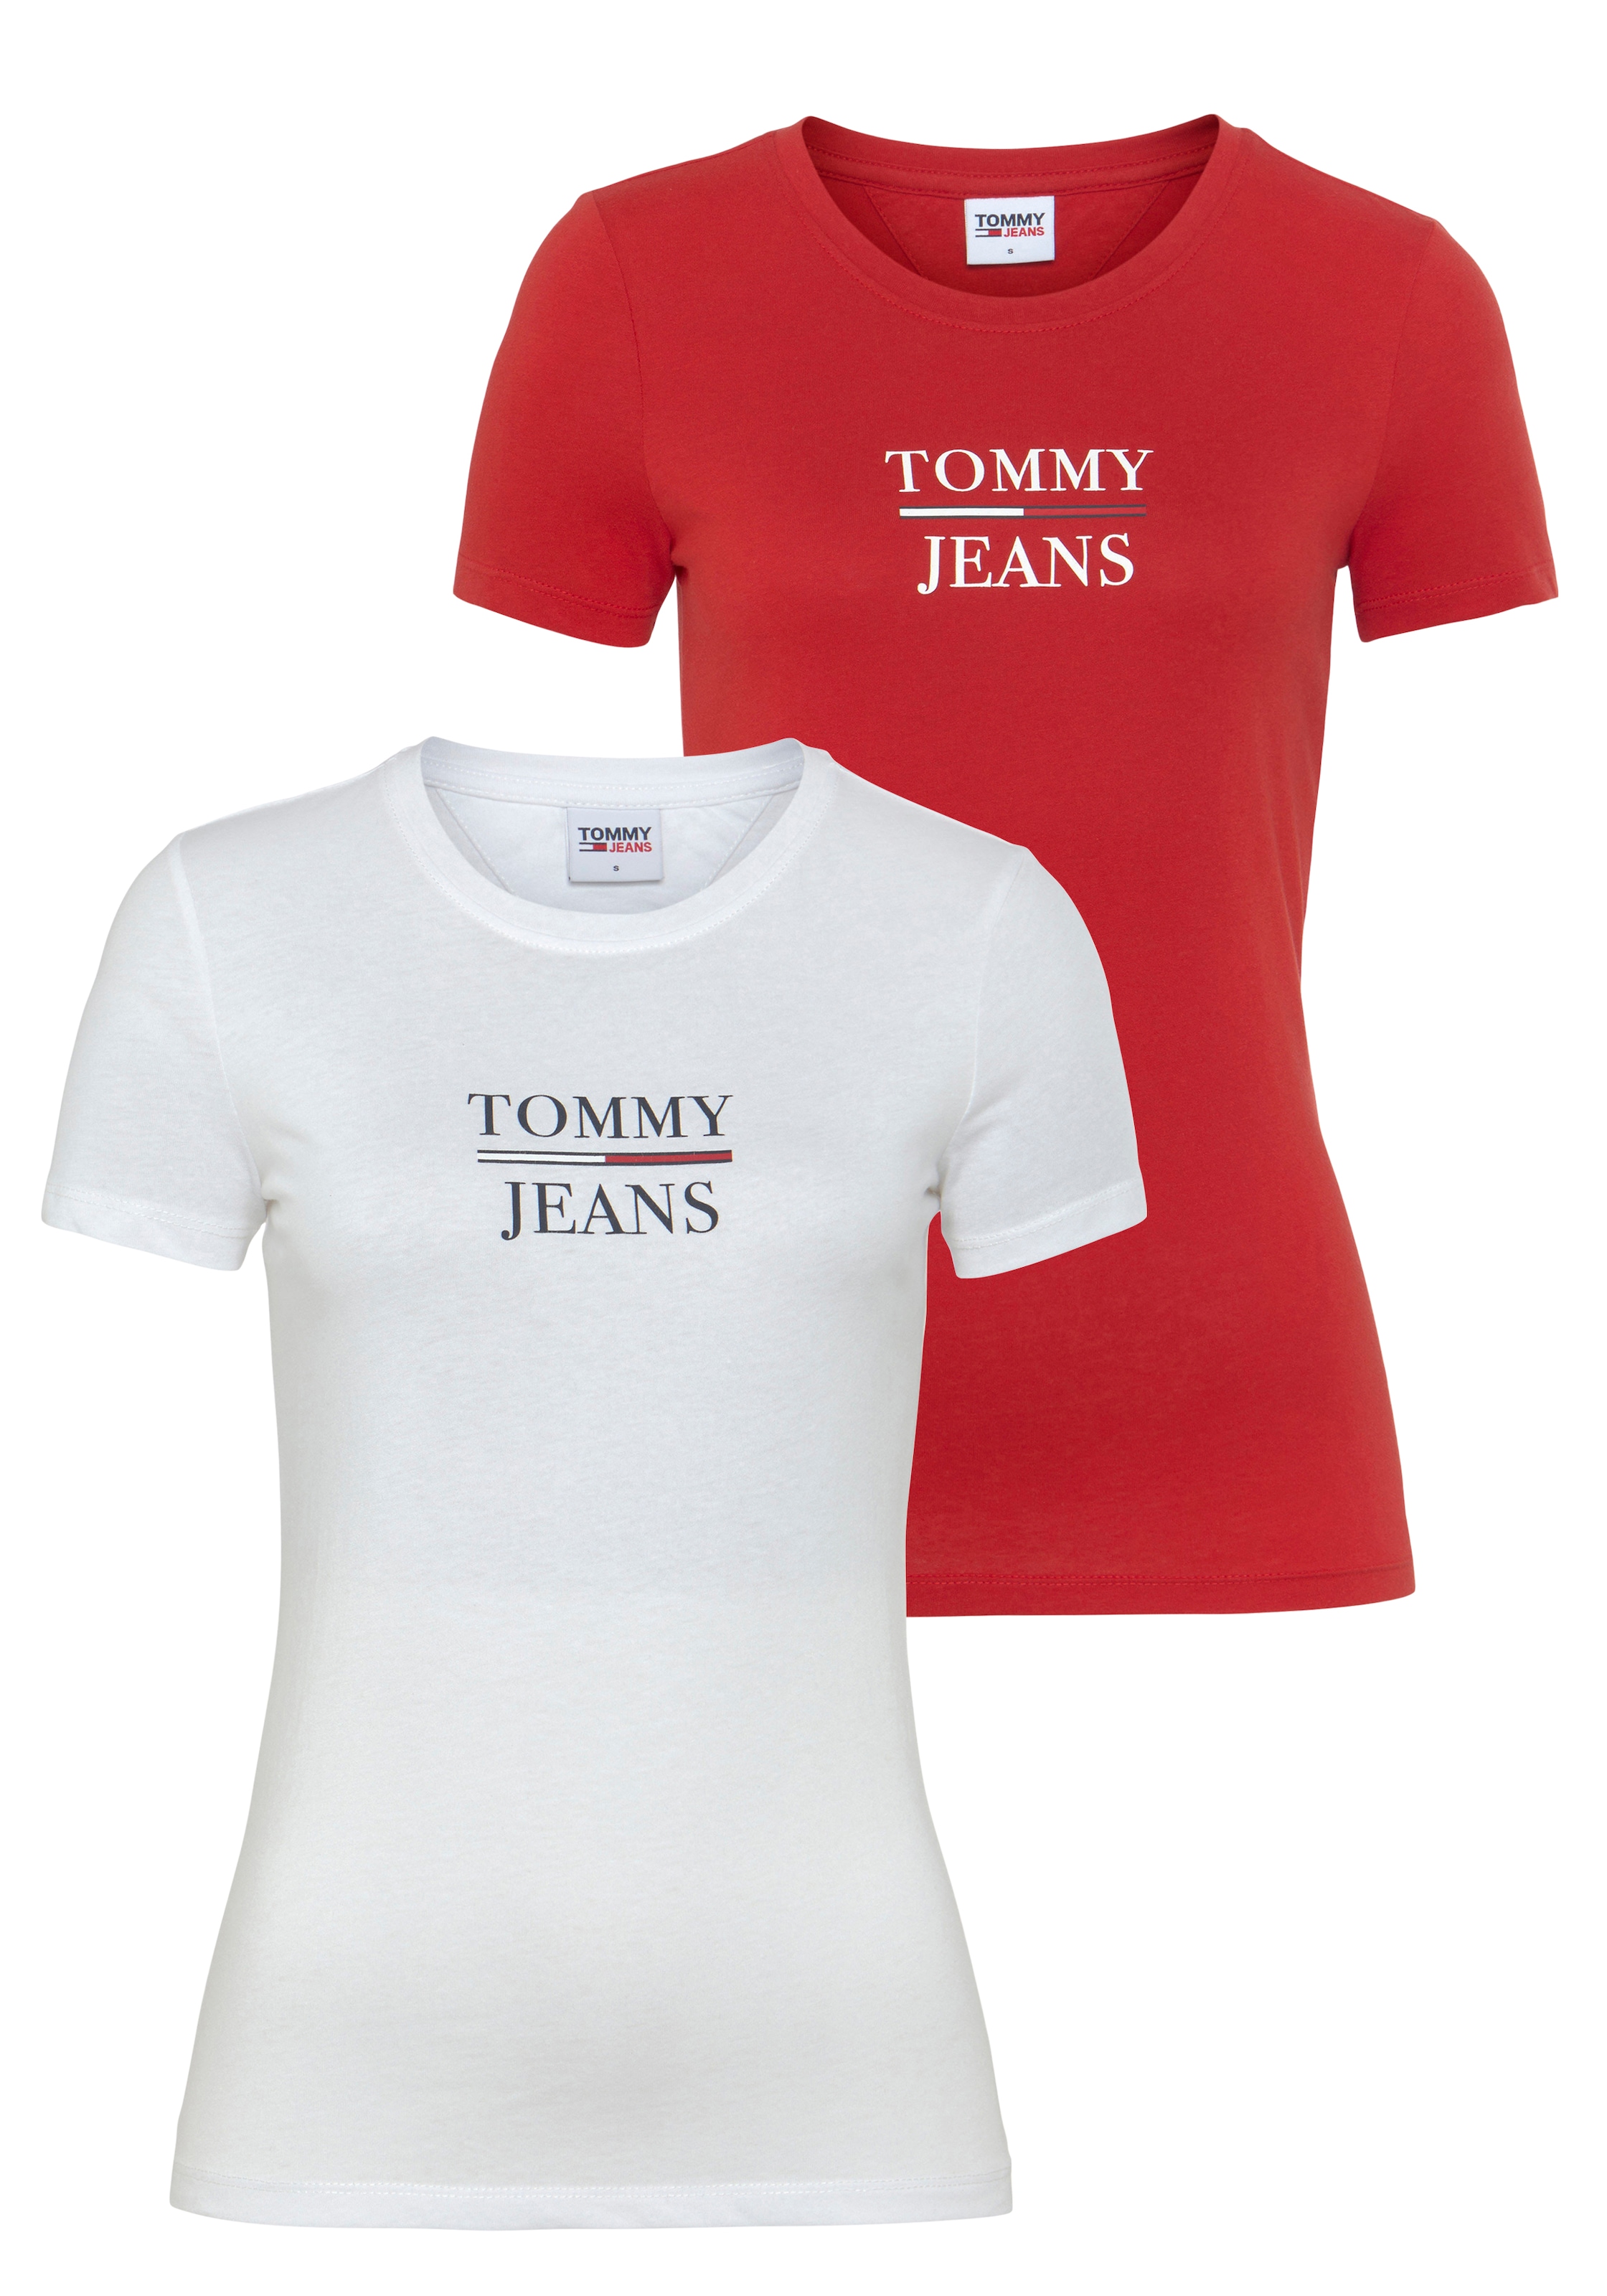 »TJW 2PACK SS«, TOMMY Tommy ♕ 2er-Pack) ESS bei (Packung, T-Shirt T Skinny Jeans